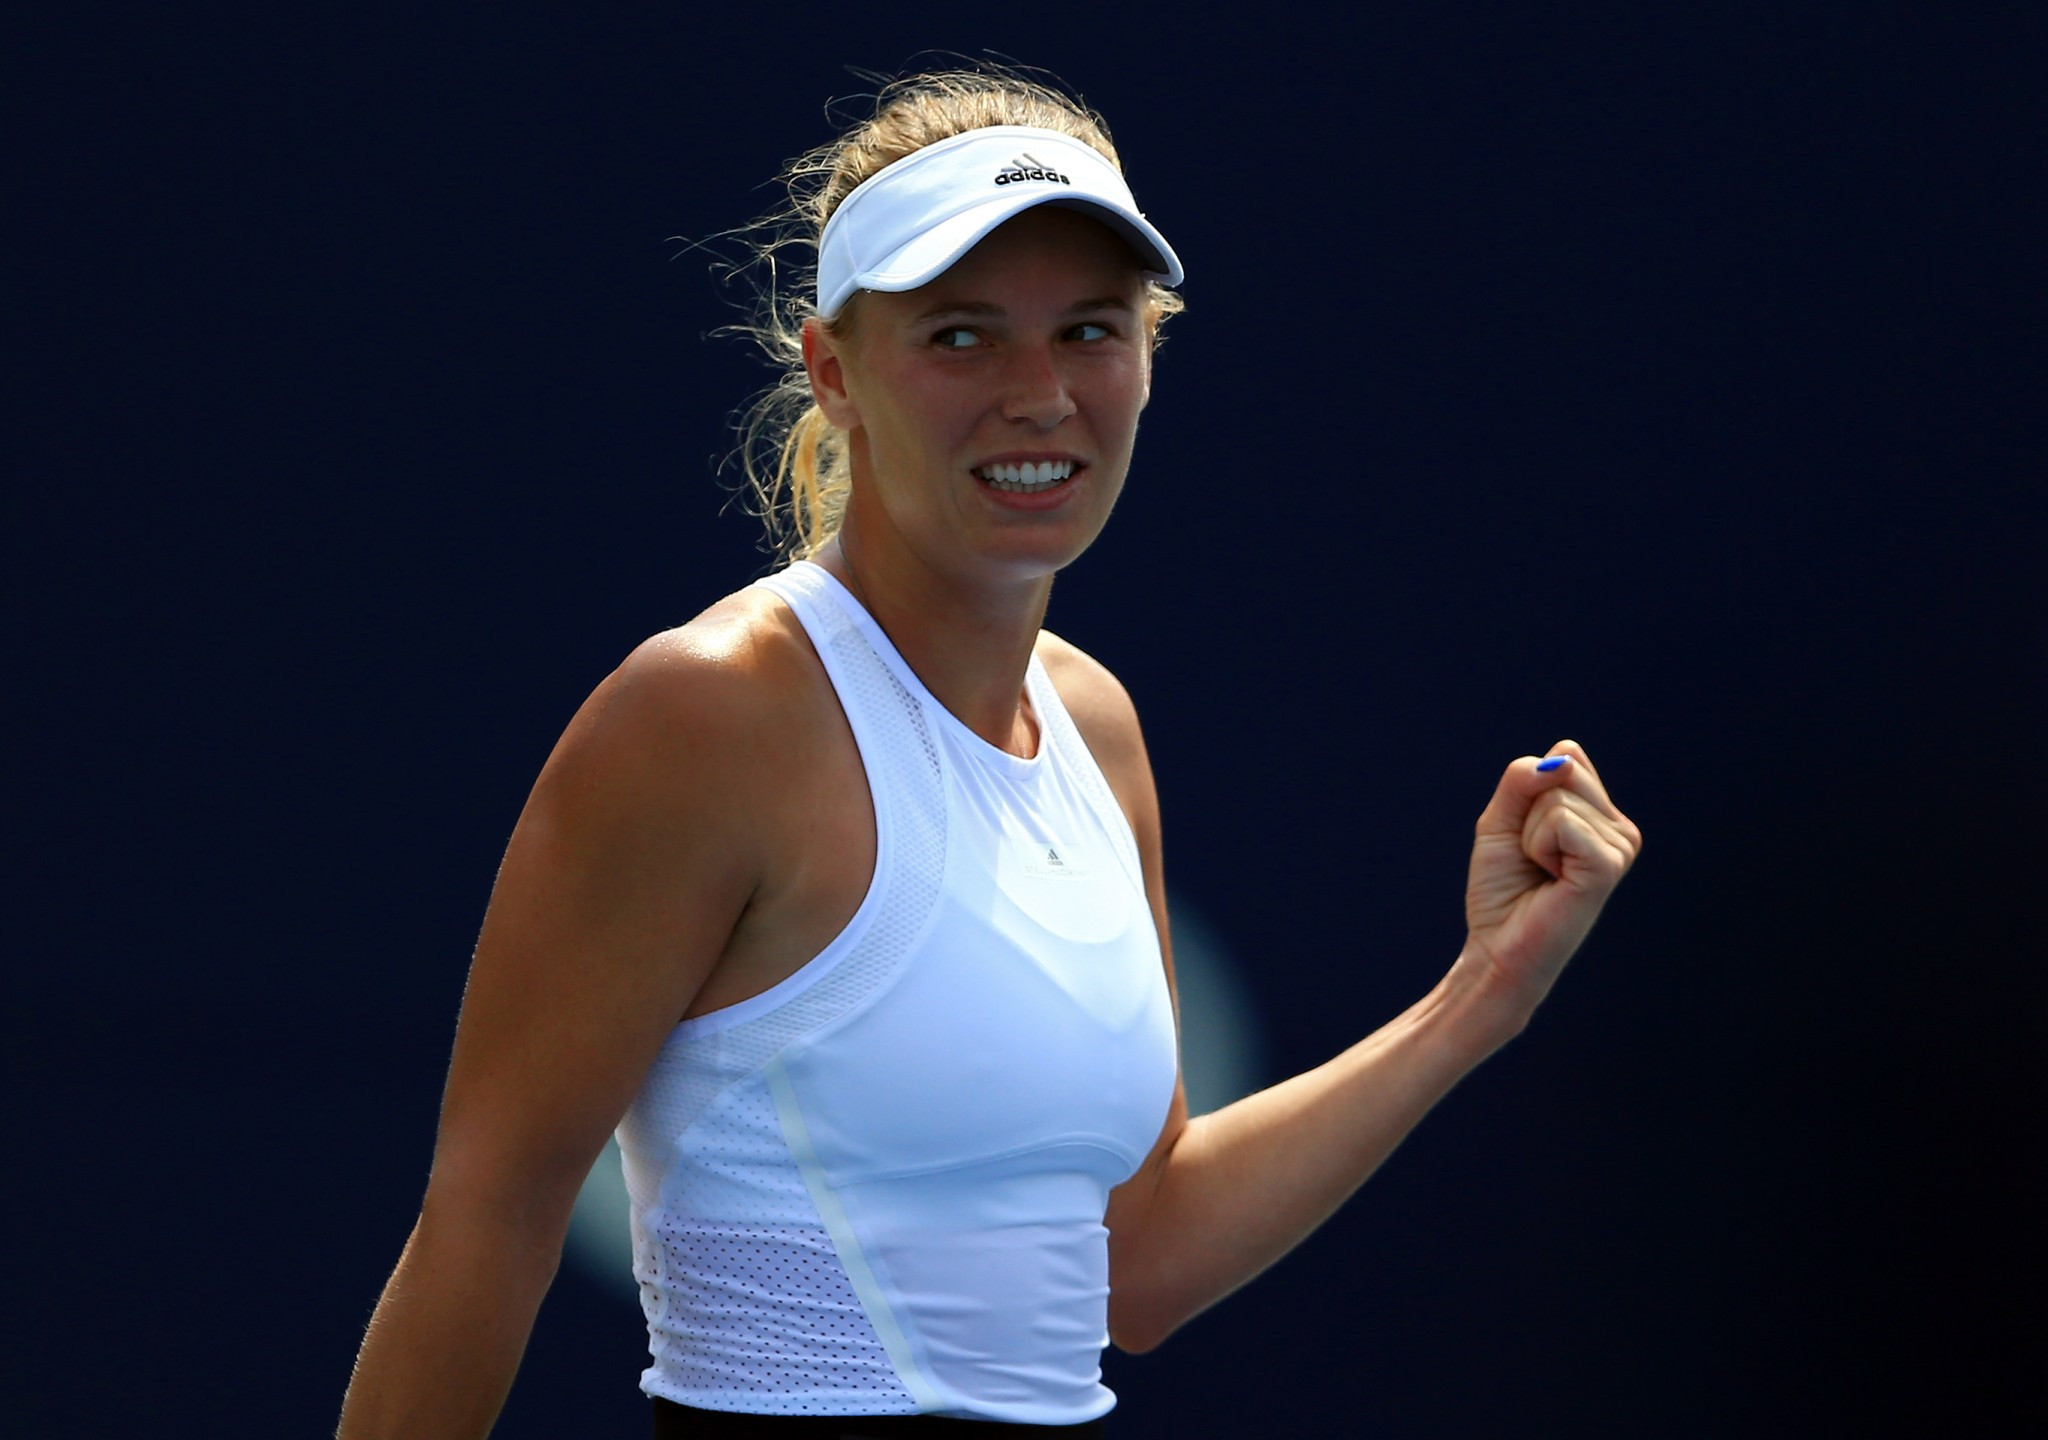 Caroline Wozniacki upset the world number one to reach the last four in Toronto ©Getty Images